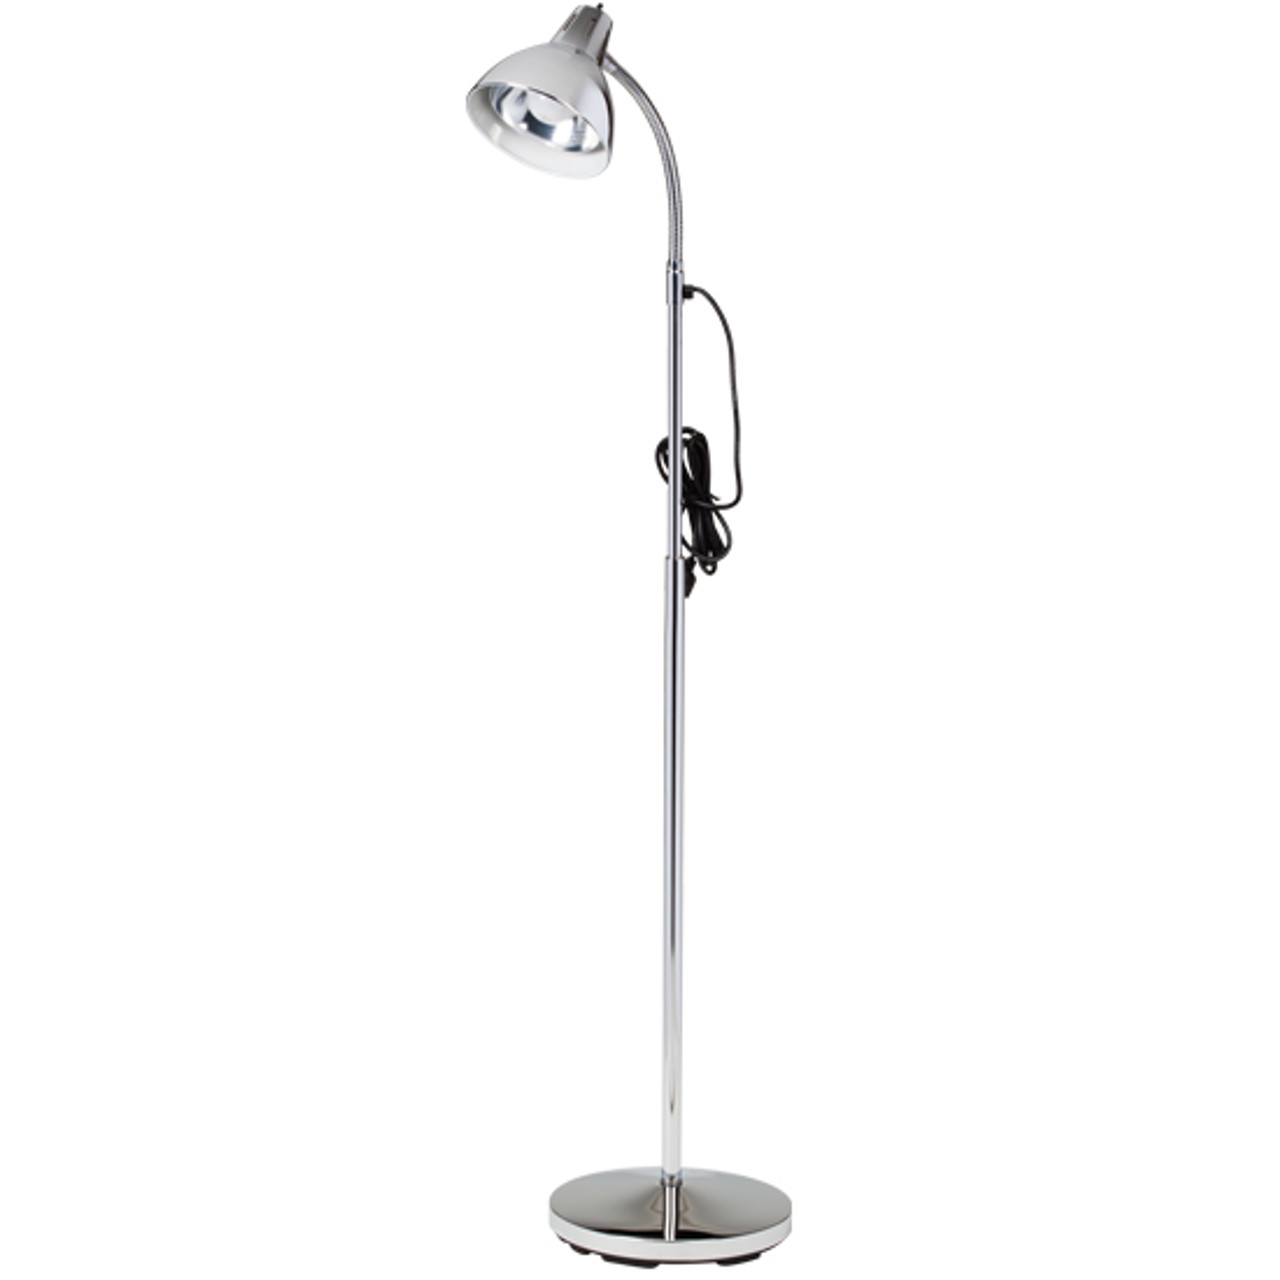 Drive Goose Neck Exam Lamp, Dome Style Shade with Mobile Base